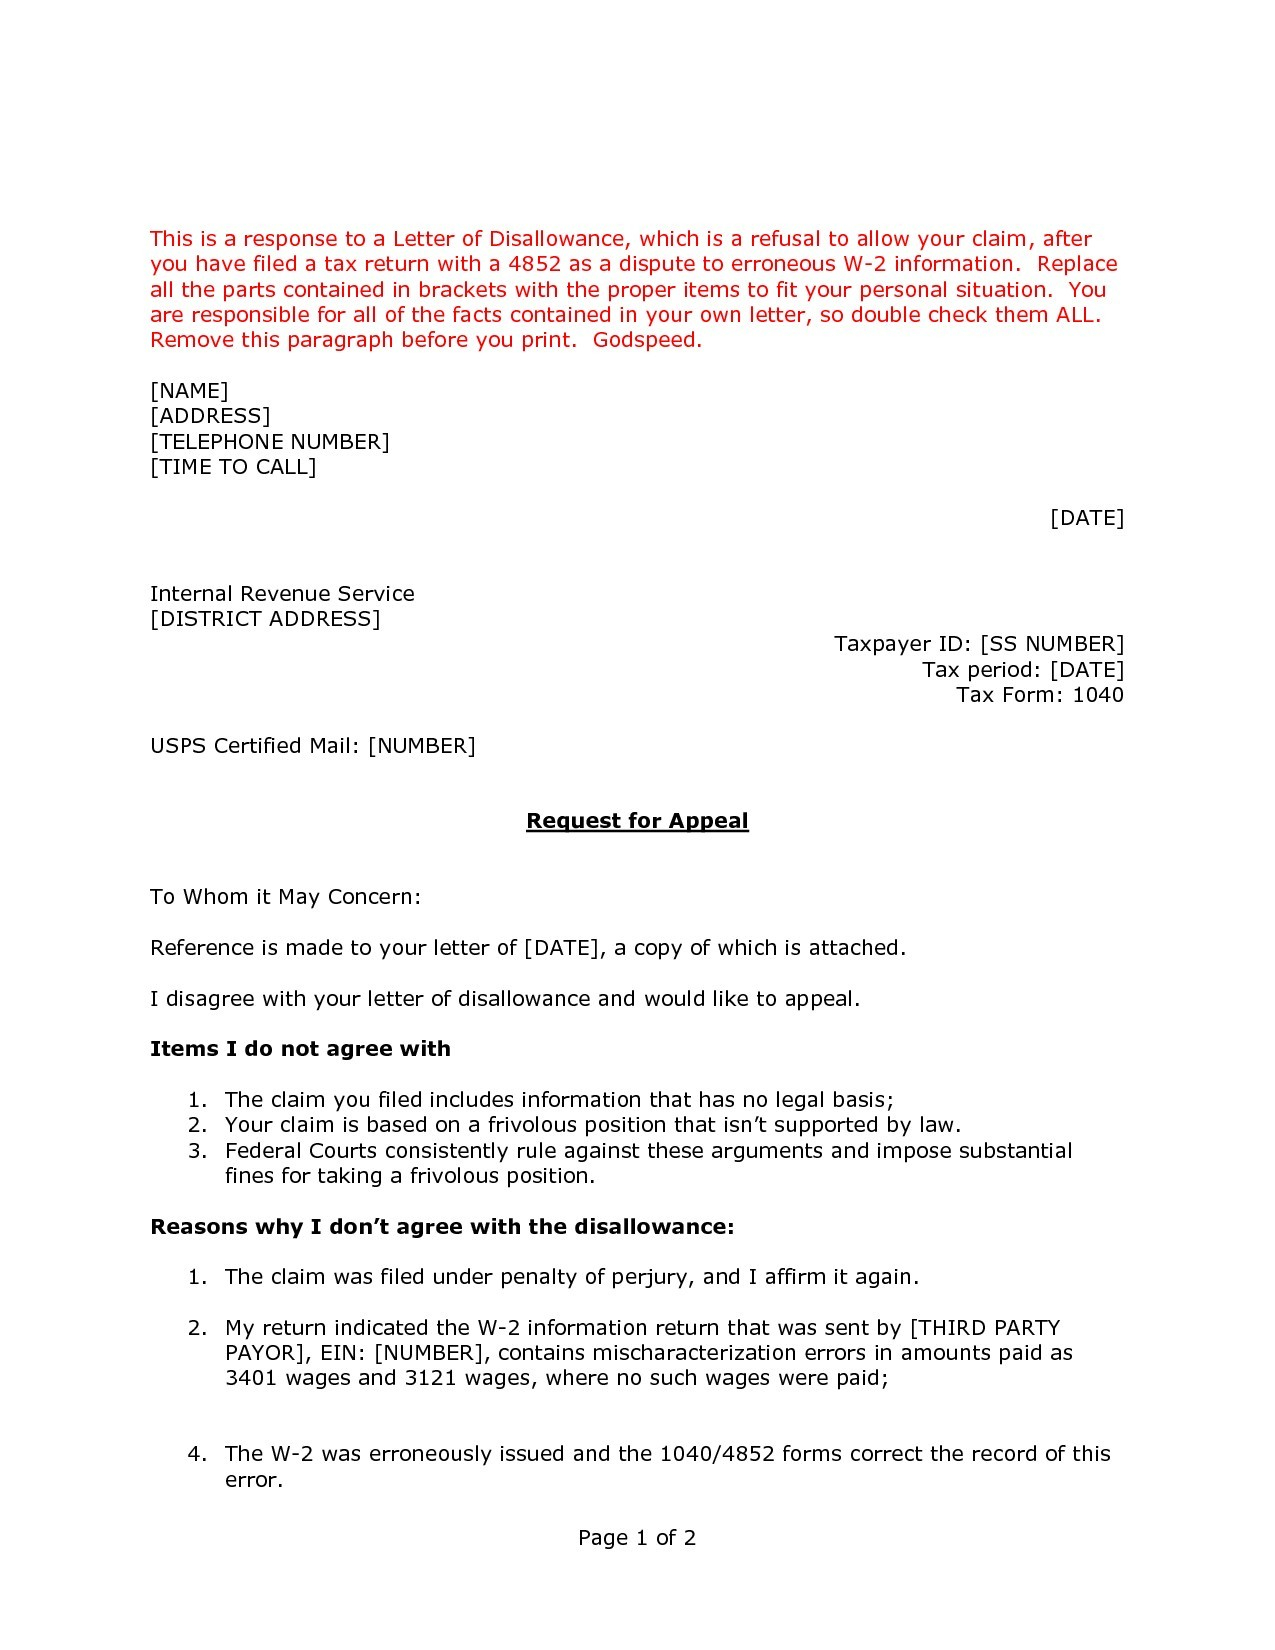 Sample Letter Of Disagreement Template - Plaint Letter Template Refund Fresh Luggage Claim Letter Example